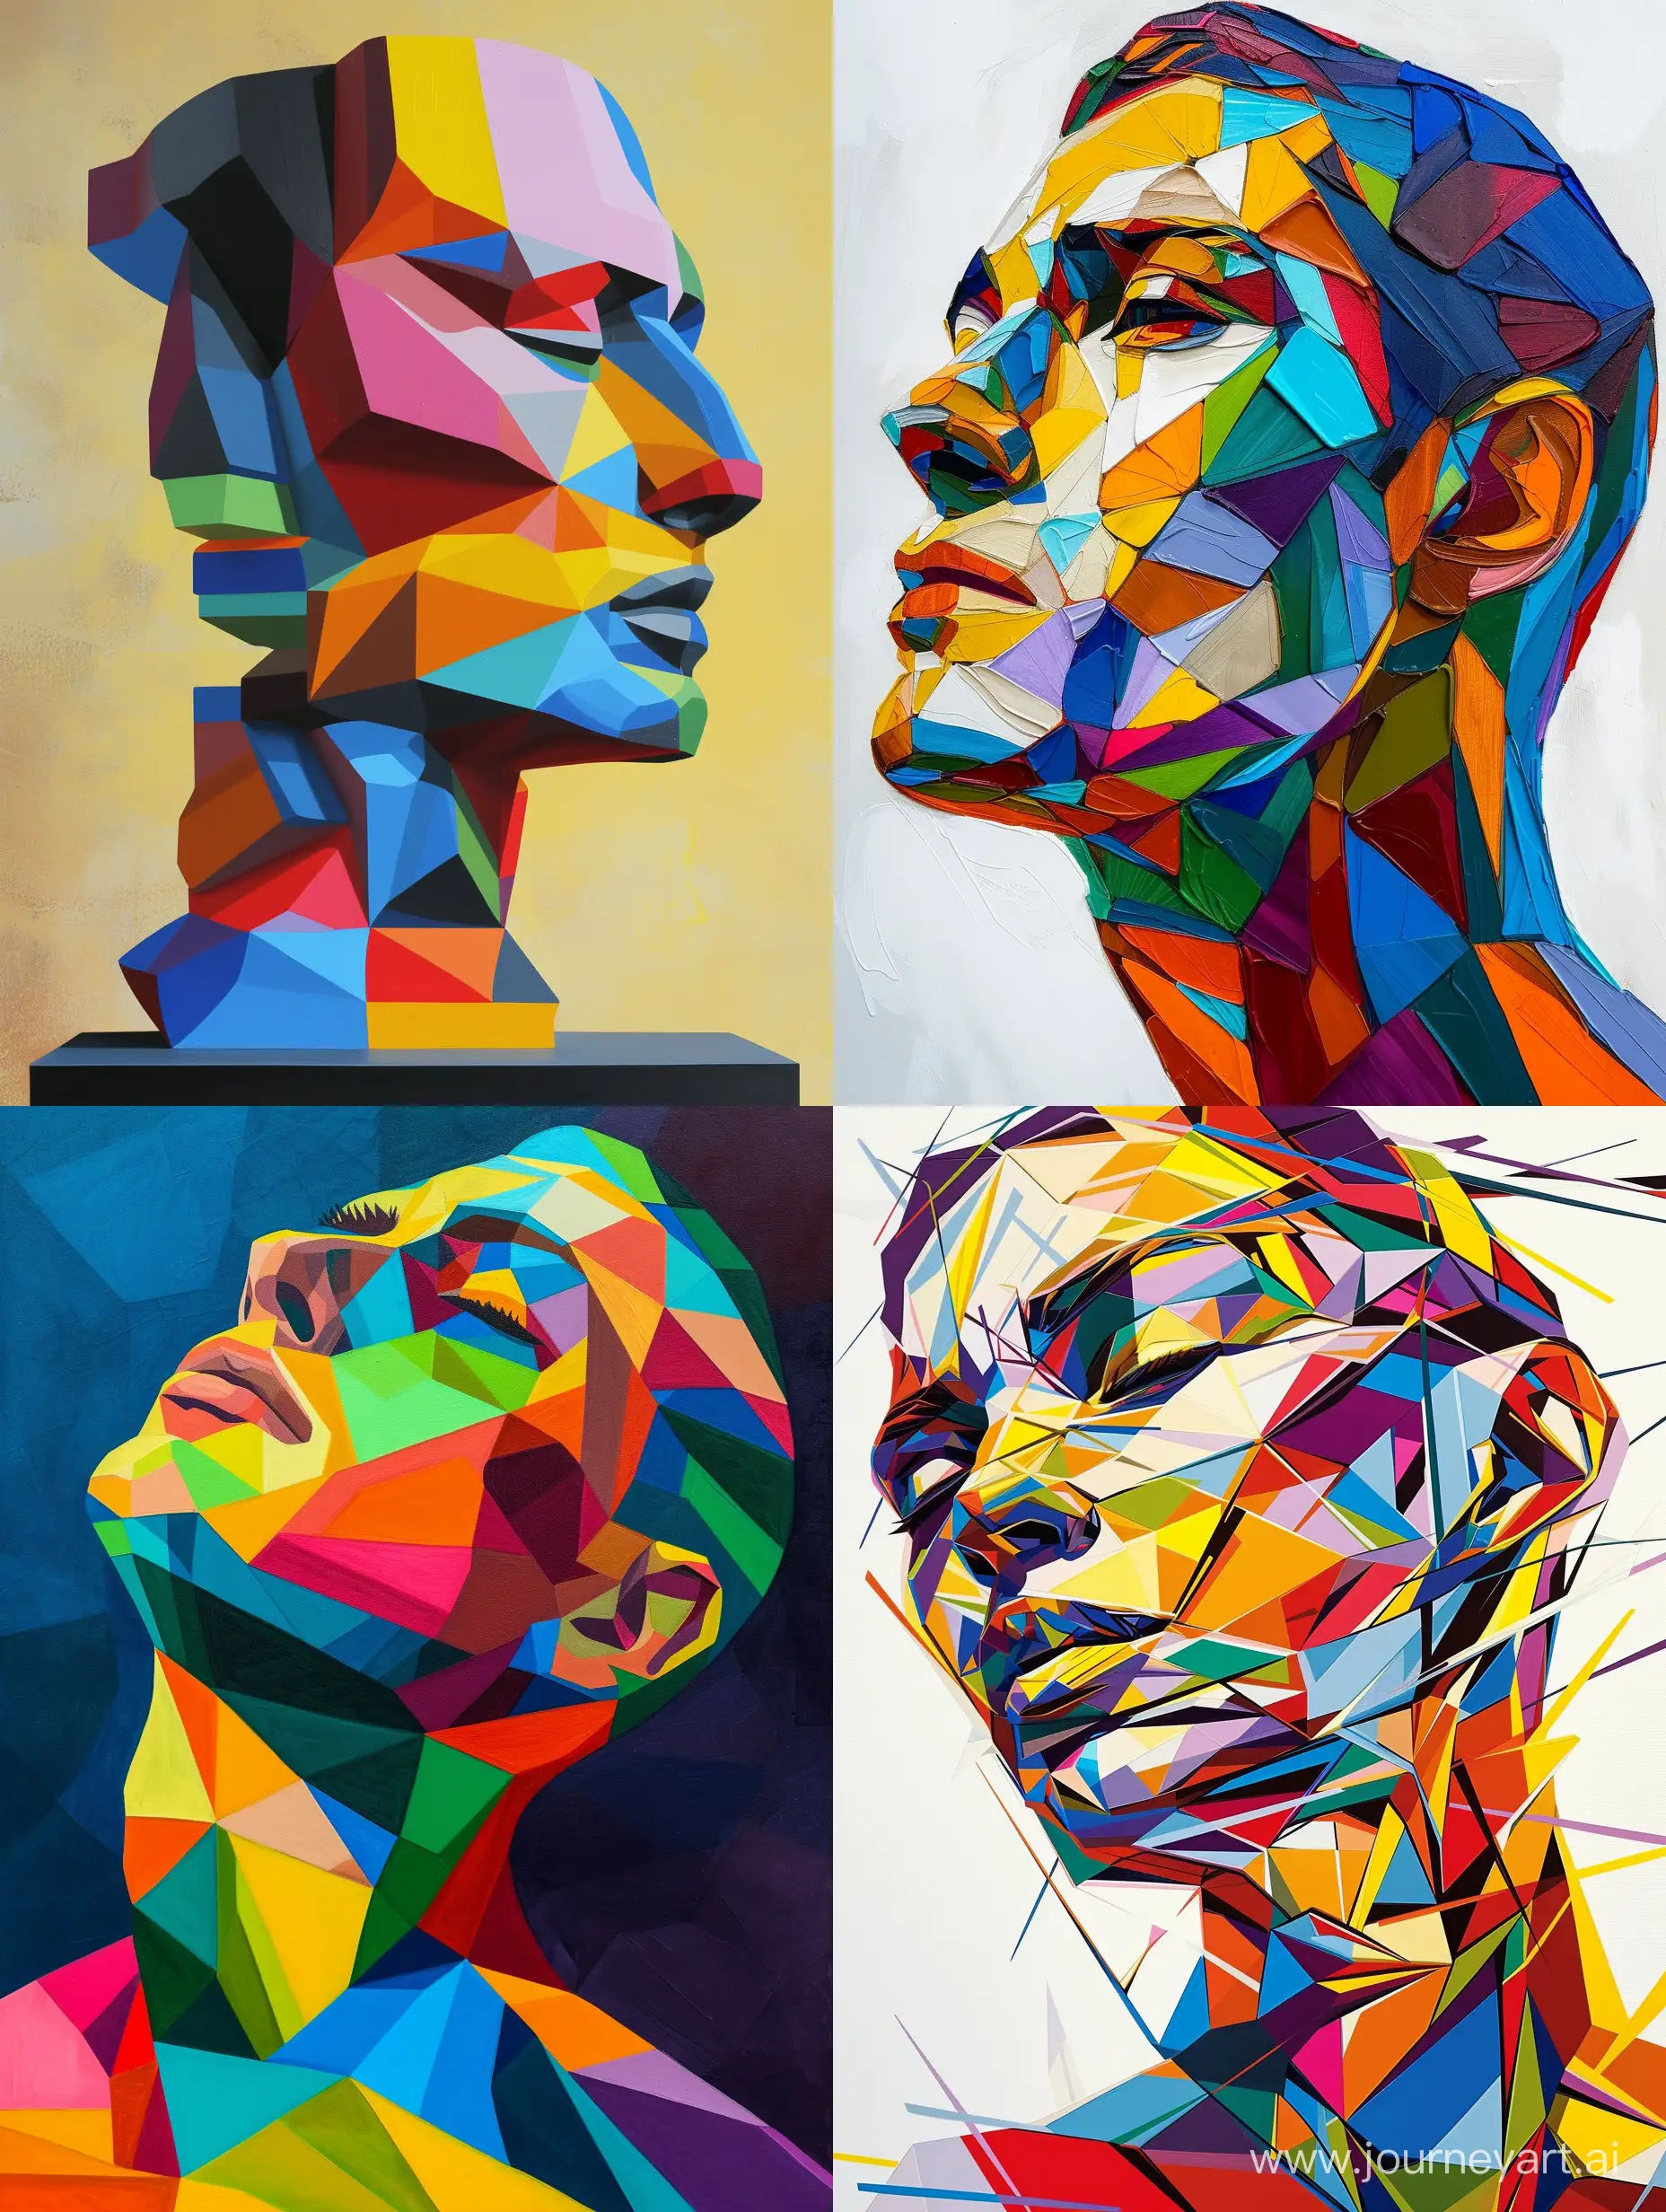 Vibrant-Abstract-Portrait-Man-Sculpture-Modern-Geometric-Harmony-in-Acrylic-Colors